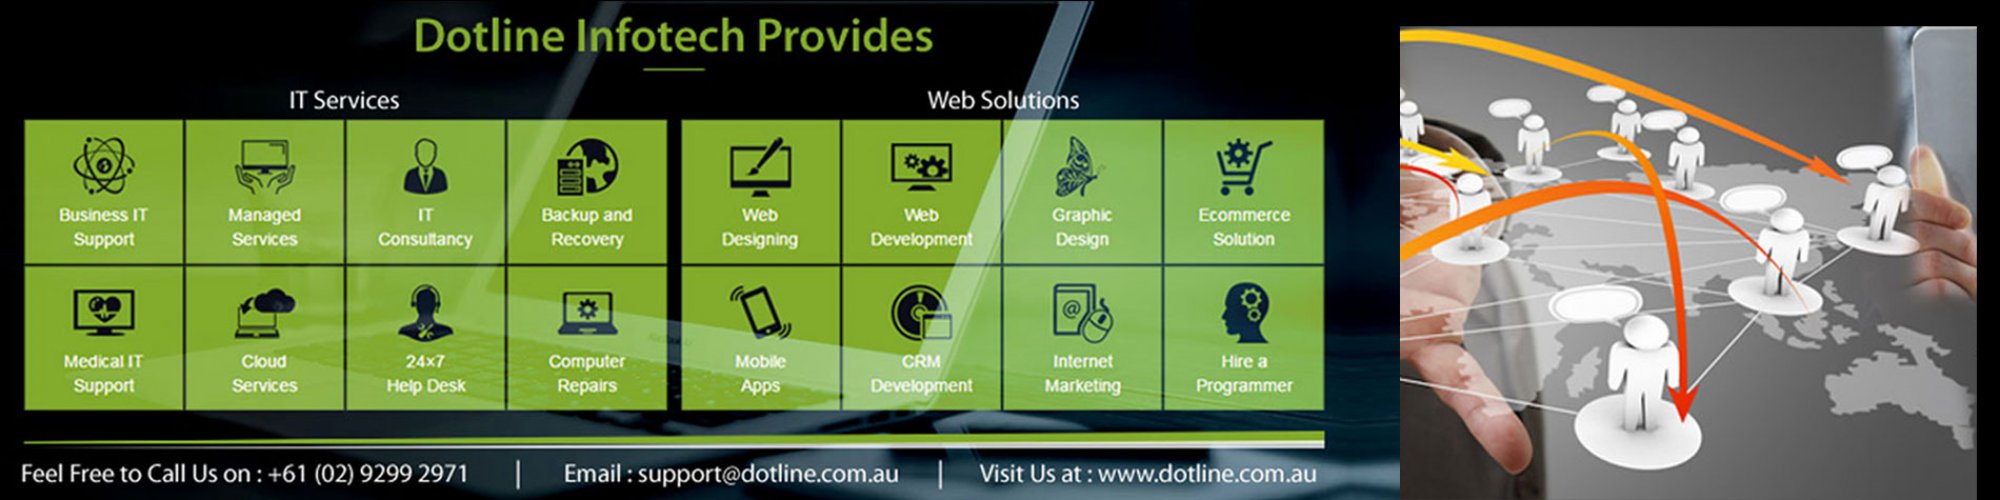 Dotline Infotech an IT Support Company in Sydney